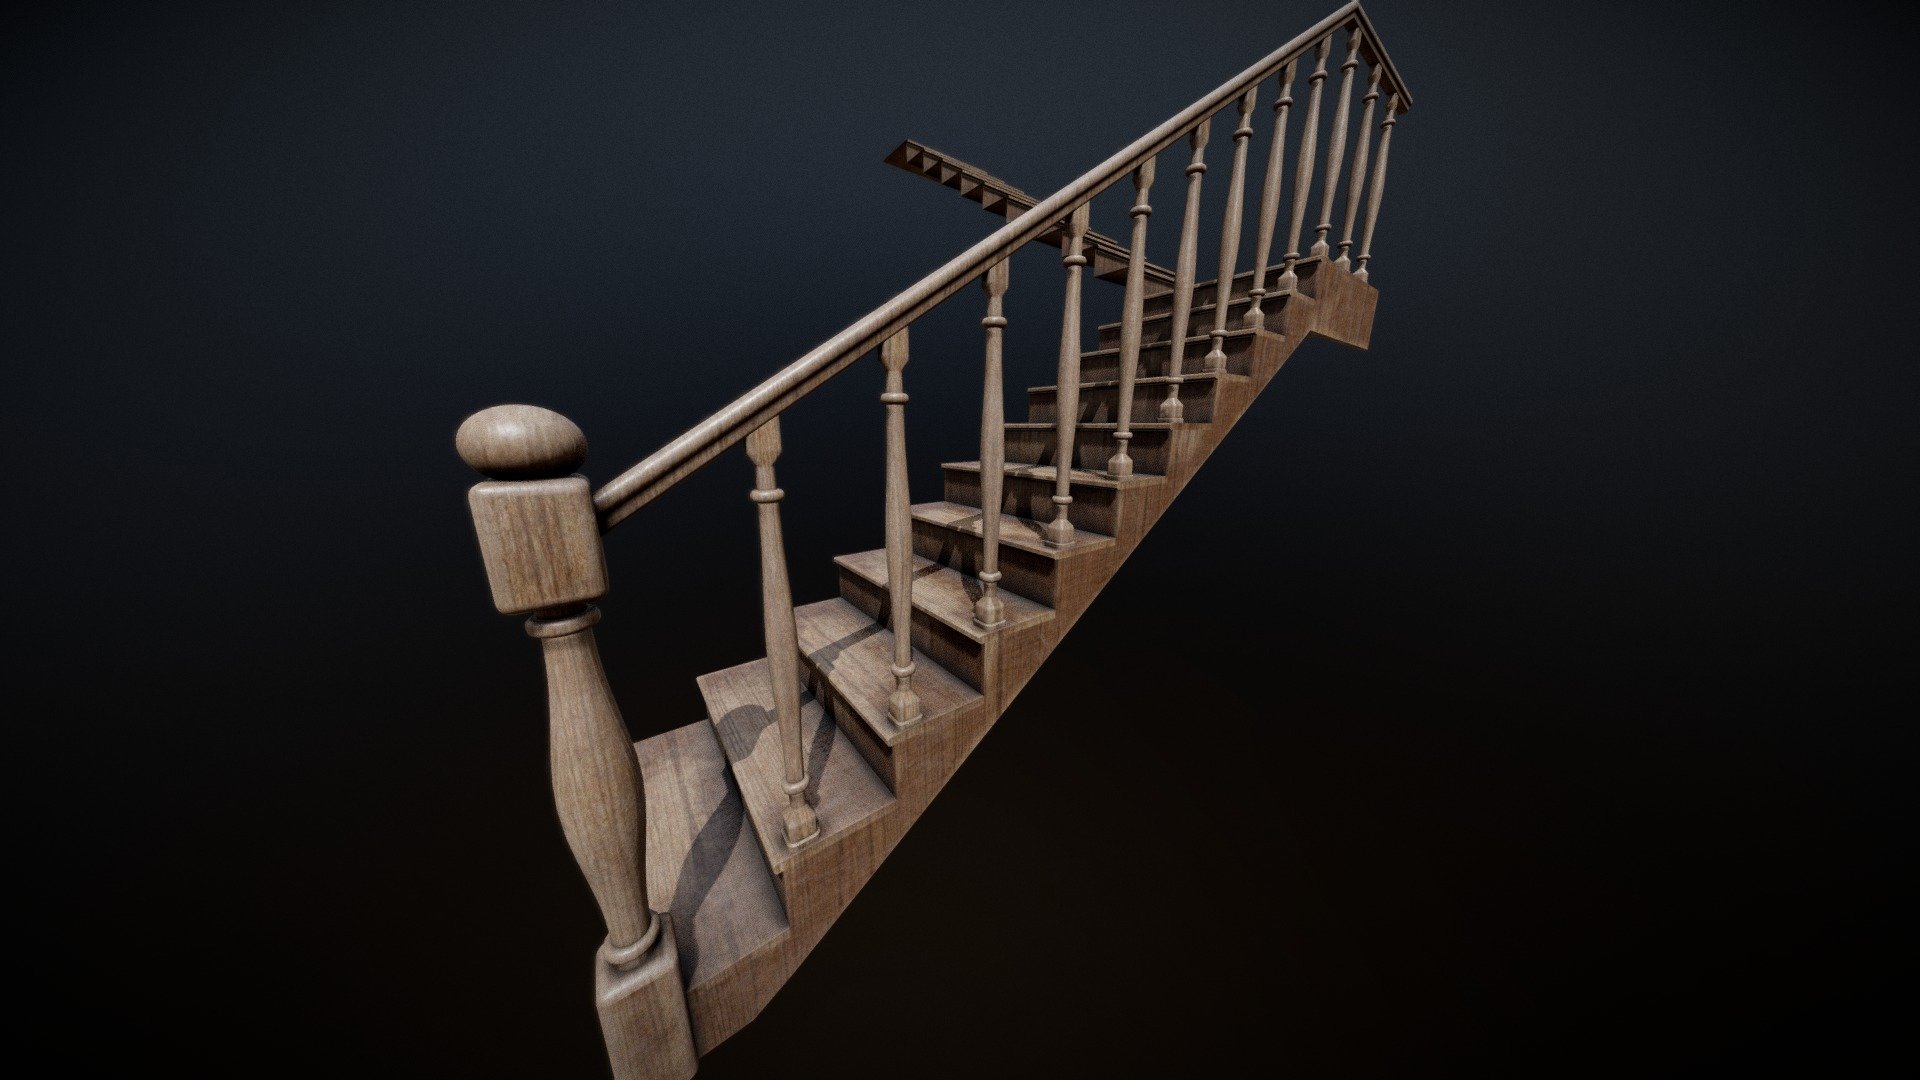 Escada (stairs) - 3D model by Adriano Oliveira (@adriano) 3d model